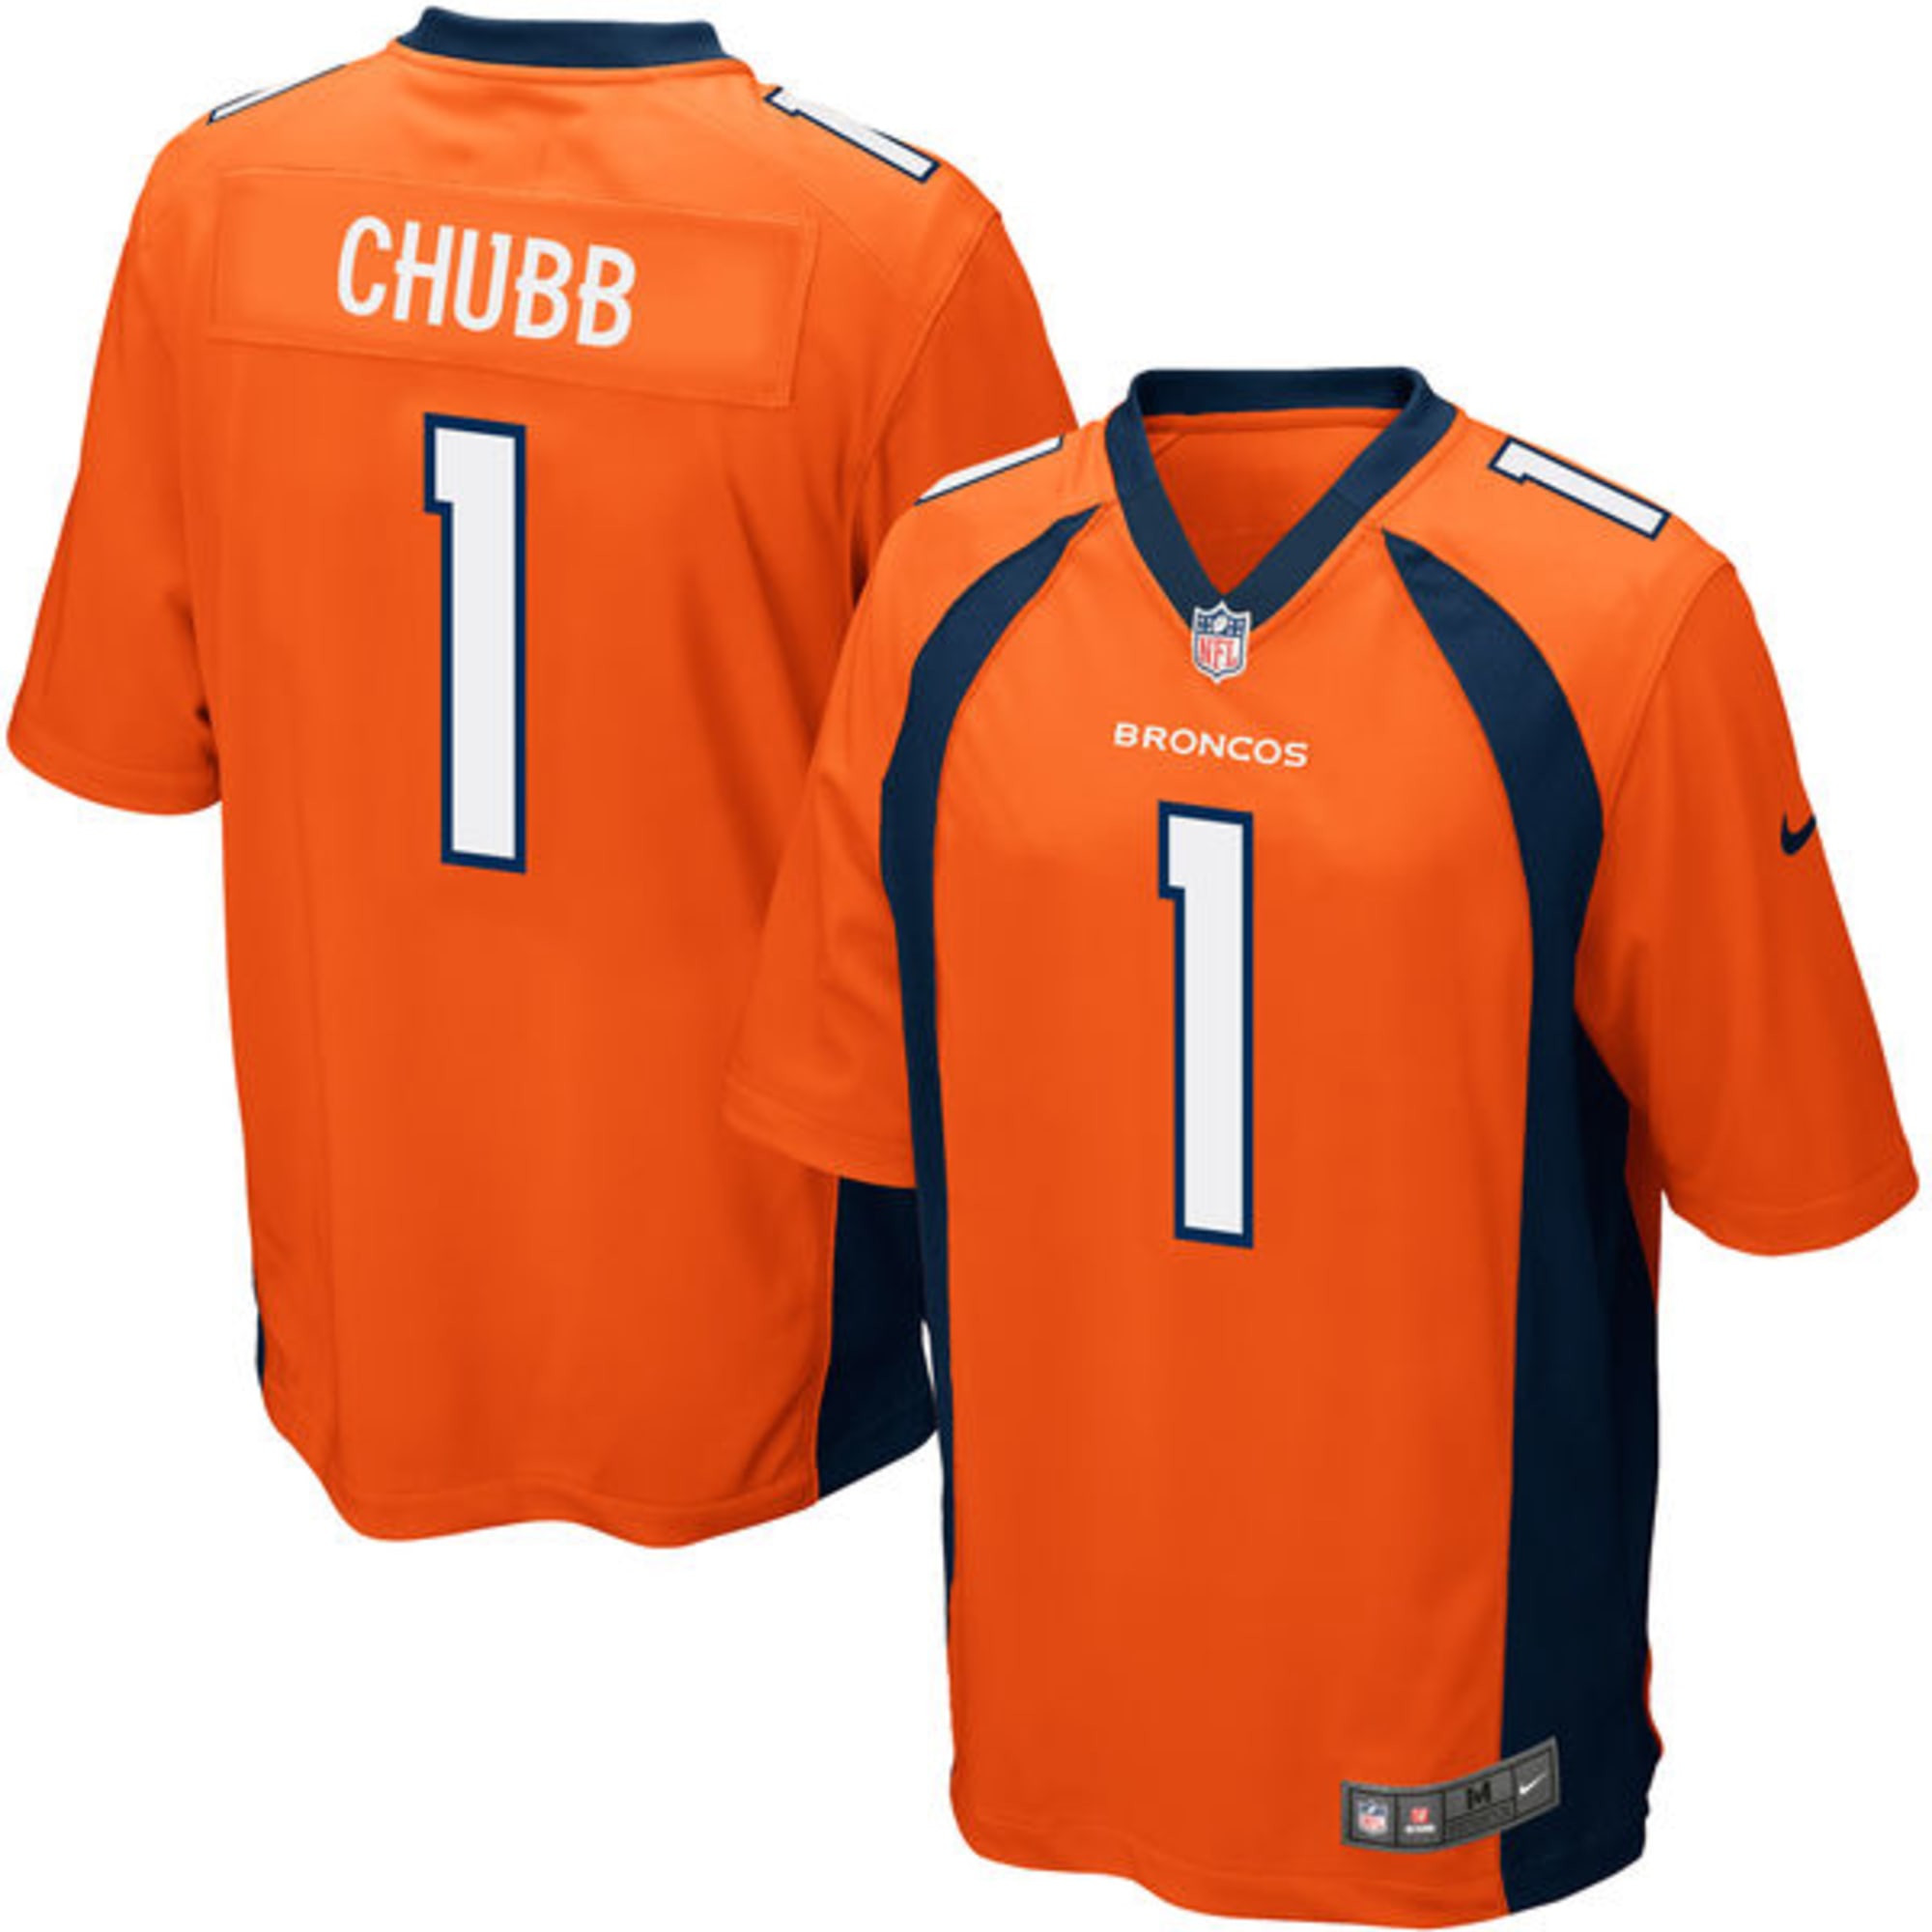 Get your NFL Draft first-round pick jerseys right now